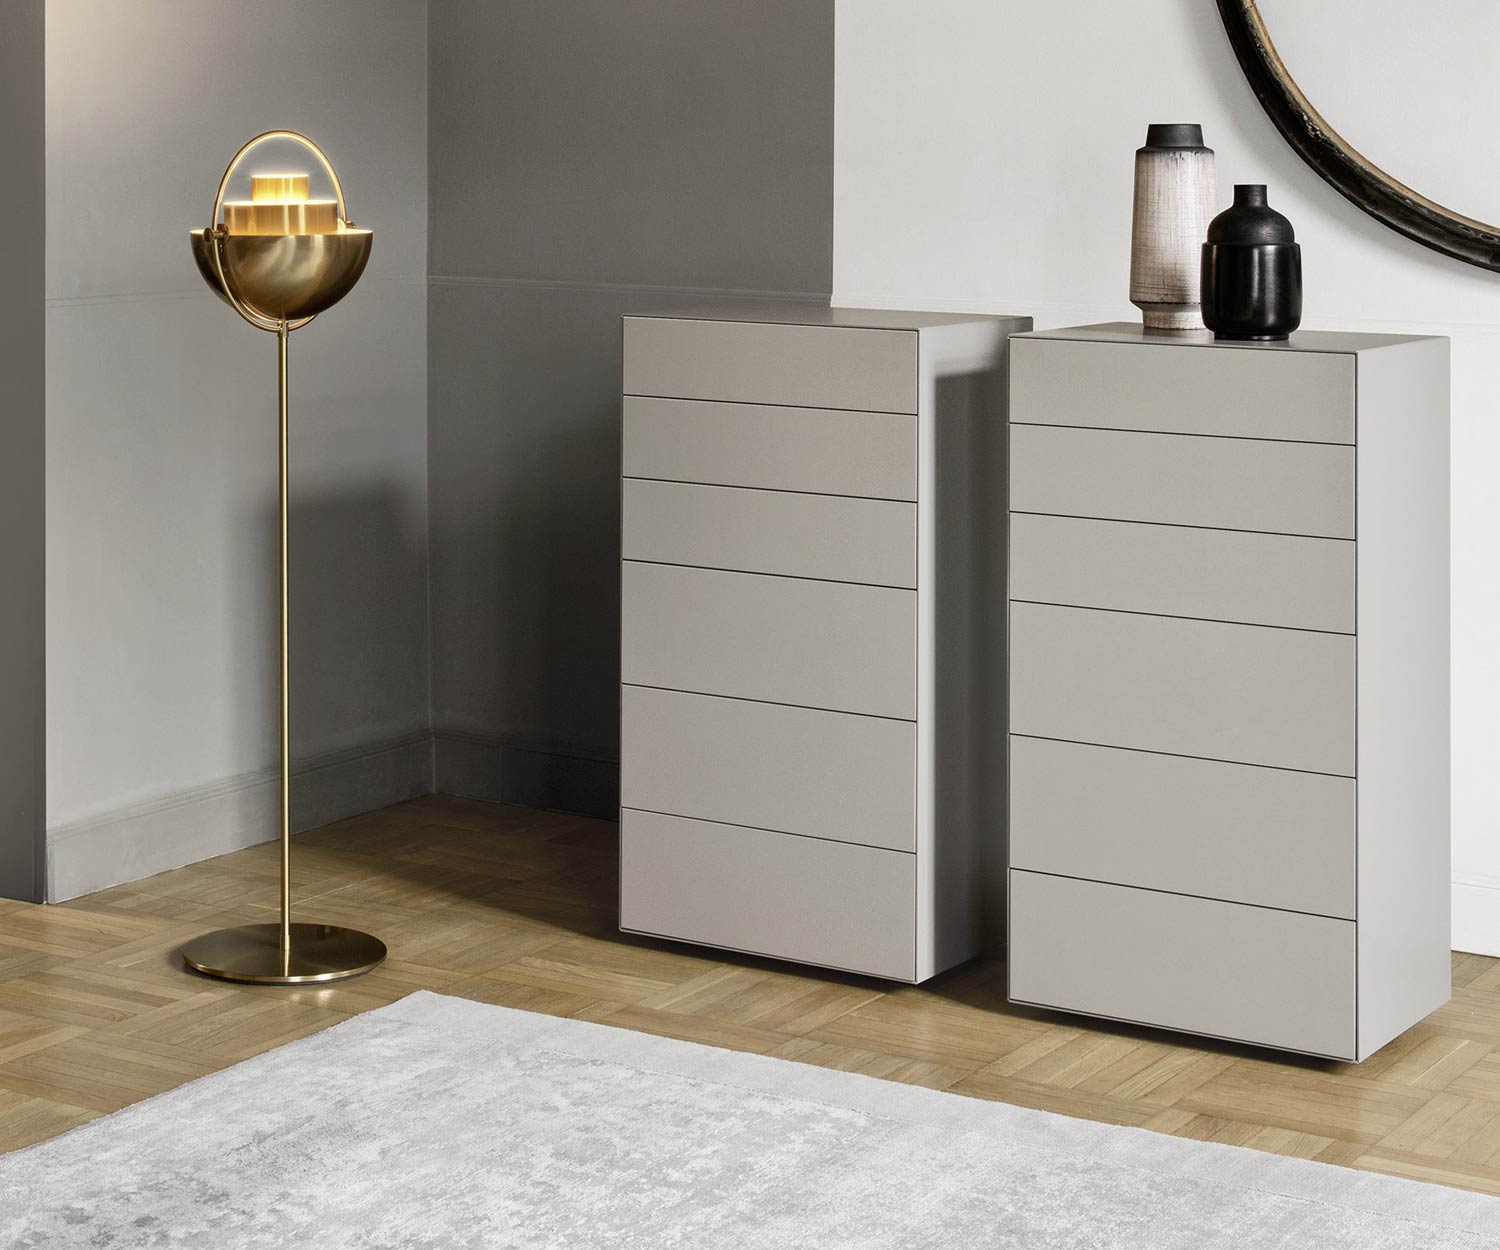 Exclusive Livitalia Ecletto tall chest of drawers 6 handleless drawers